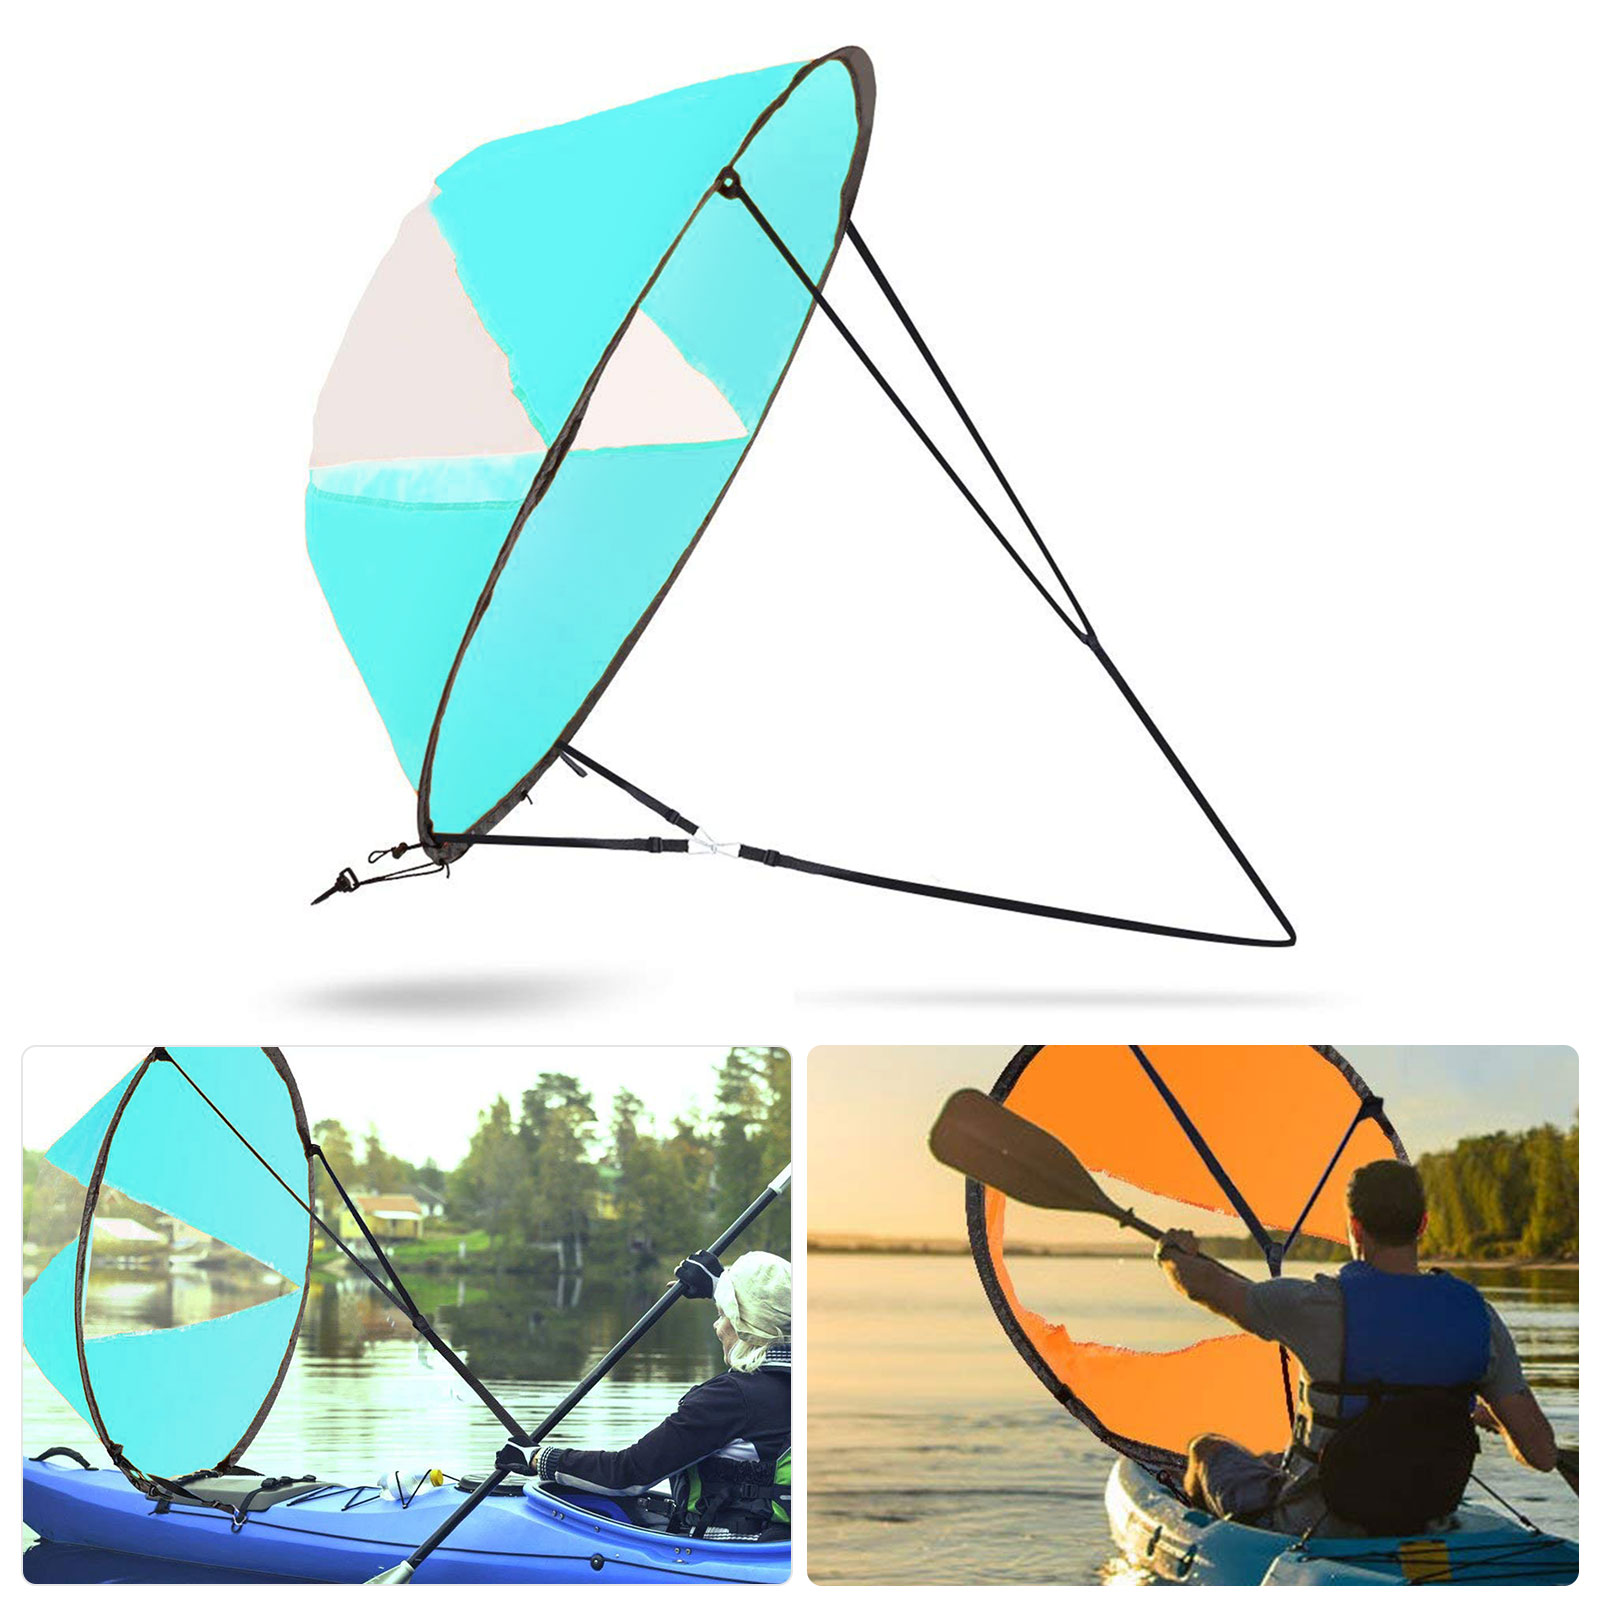 New Style Durable 42" Kayak boat Wind Sail Sup Paddle Board Sail with clear UK 